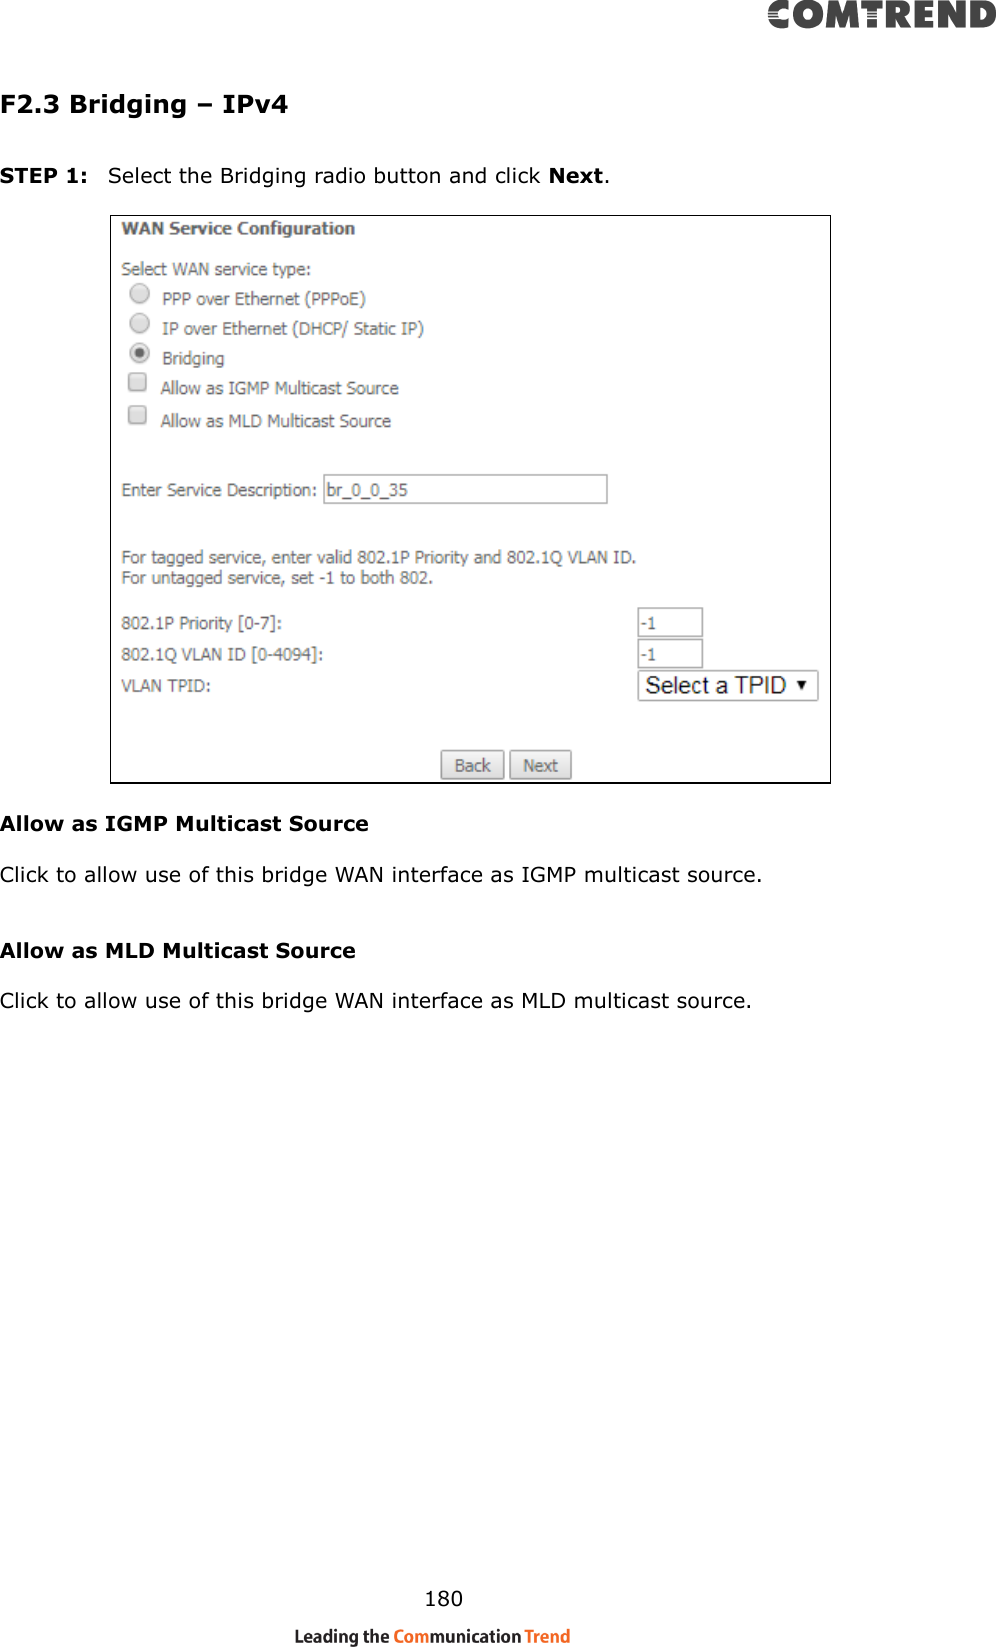    180 F2.3 Bridging – IPv4  STEP 1:  Select the Bridging radio button and click Next.          Allow as IGMP Multicast Source  Click to allow use of this bridge WAN interface as IGMP multicast source.   Allow as MLD Multicast Source    Click to allow use of this bridge WAN interface as MLD multicast source.       